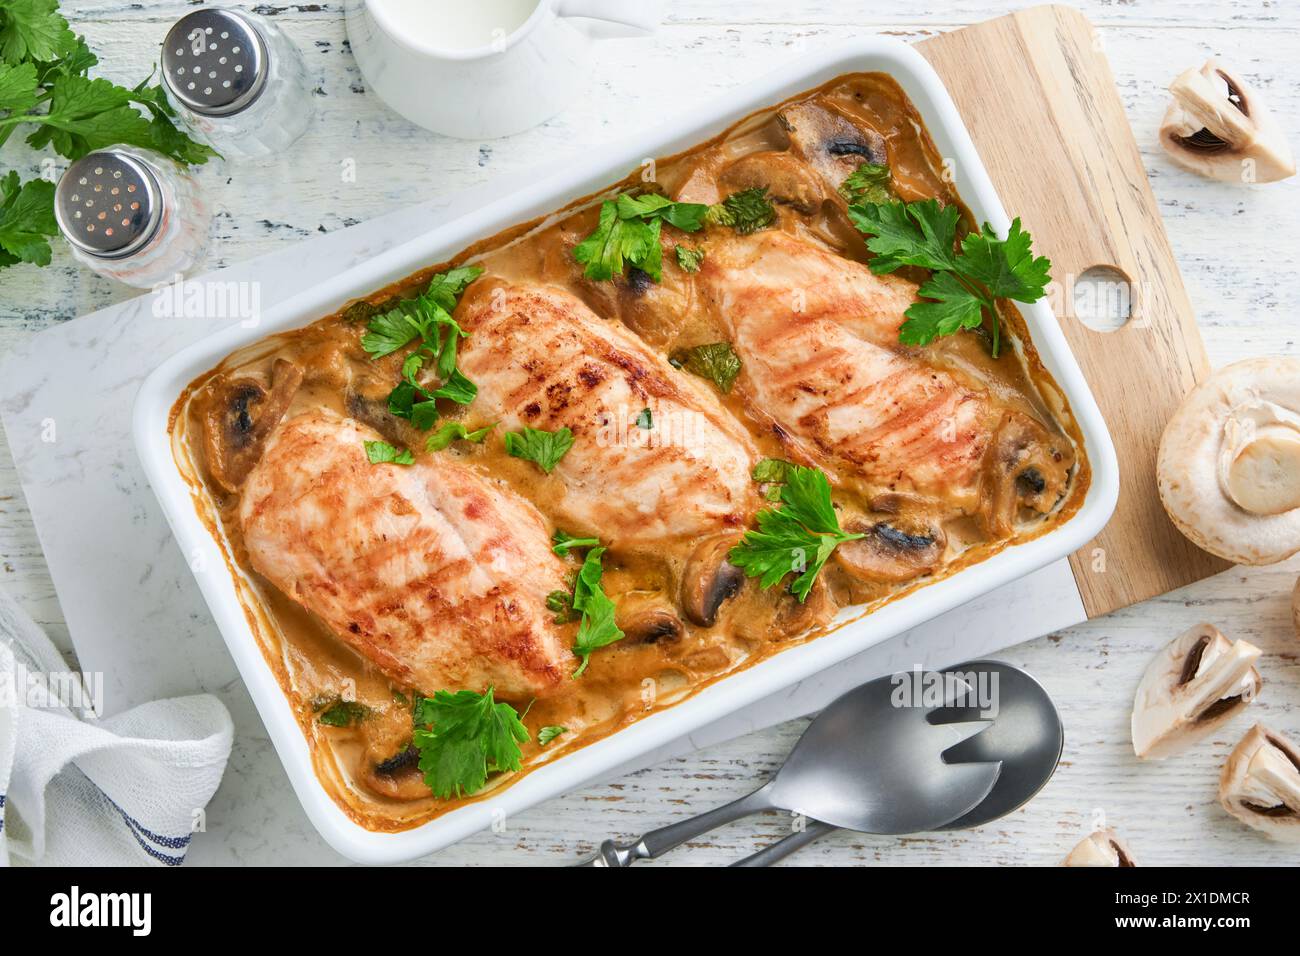 Baked chicken breast bbq with mushrooms and garlic in cream sauce on white wooden table backgrounds. Top view image with ingredients for cooking. Top Stock Photo